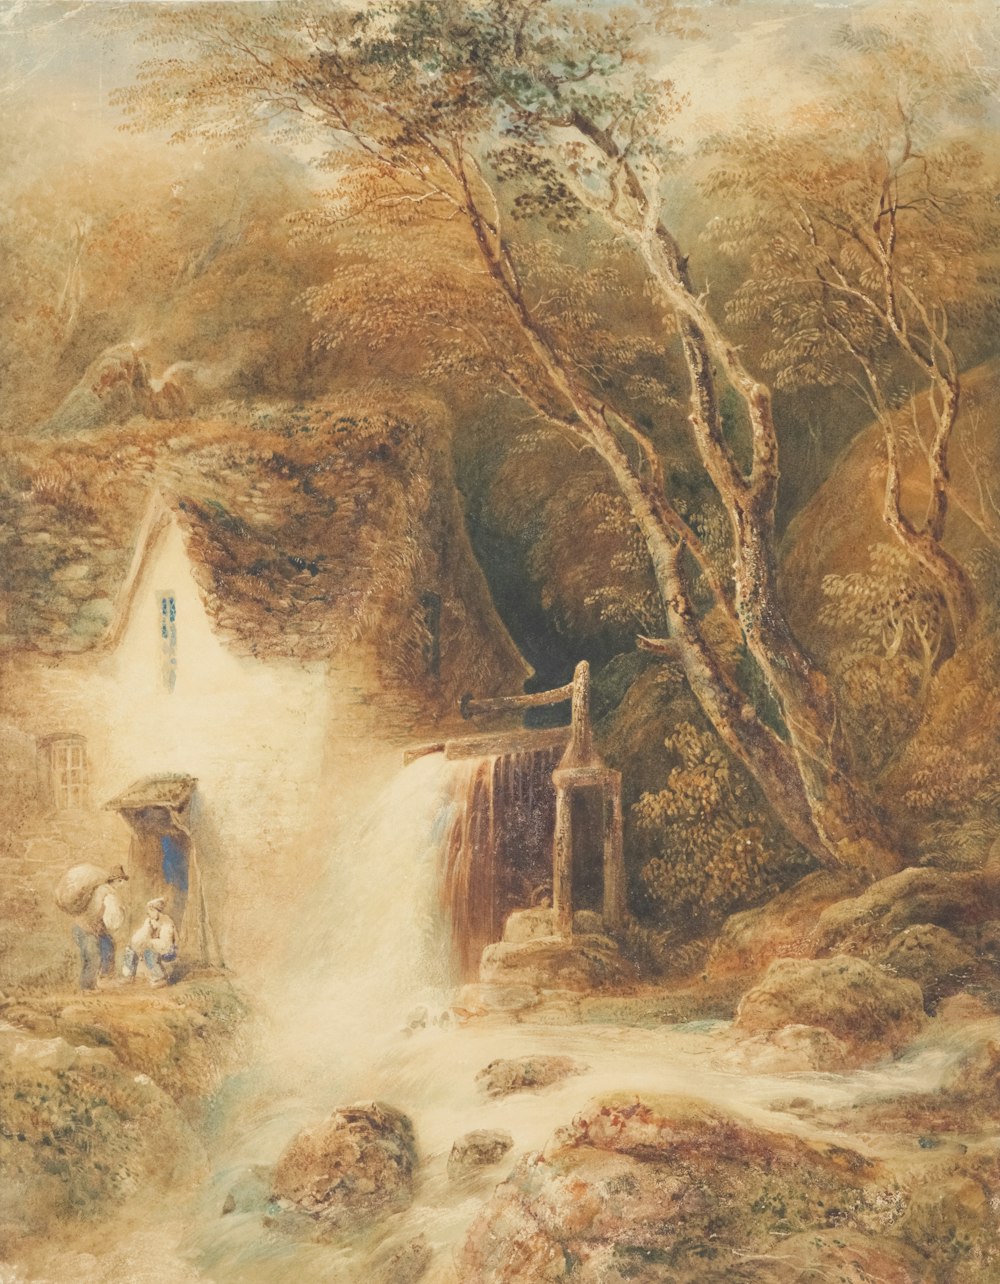 a painting of a man and a woman by a waterfall